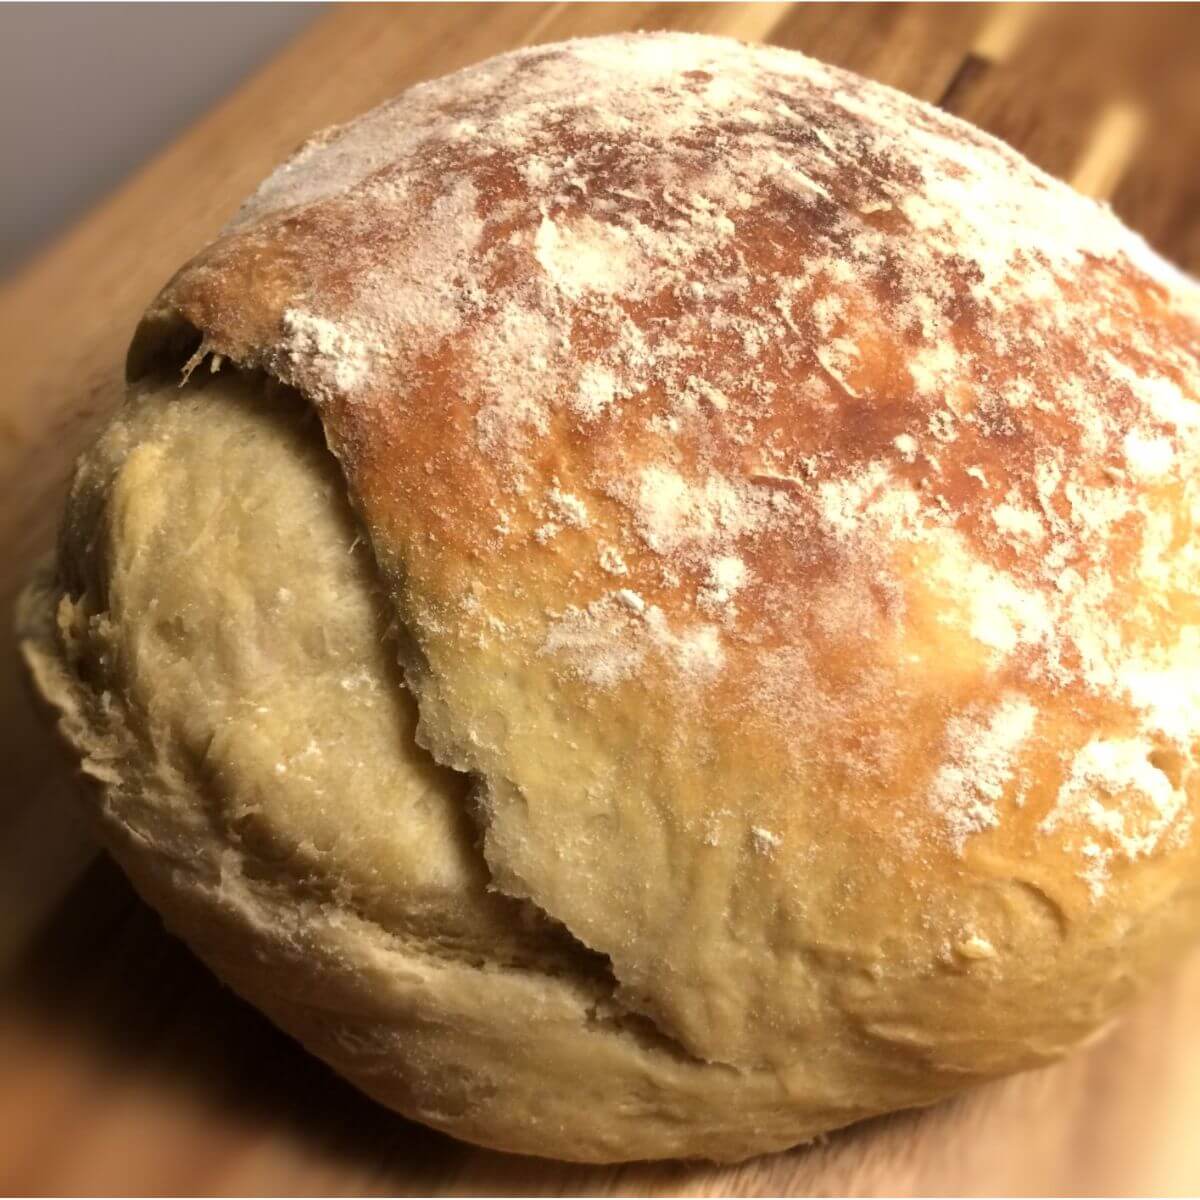 smaller bloomer bread round with light golden brown crust and flour dusting with the side burst open.